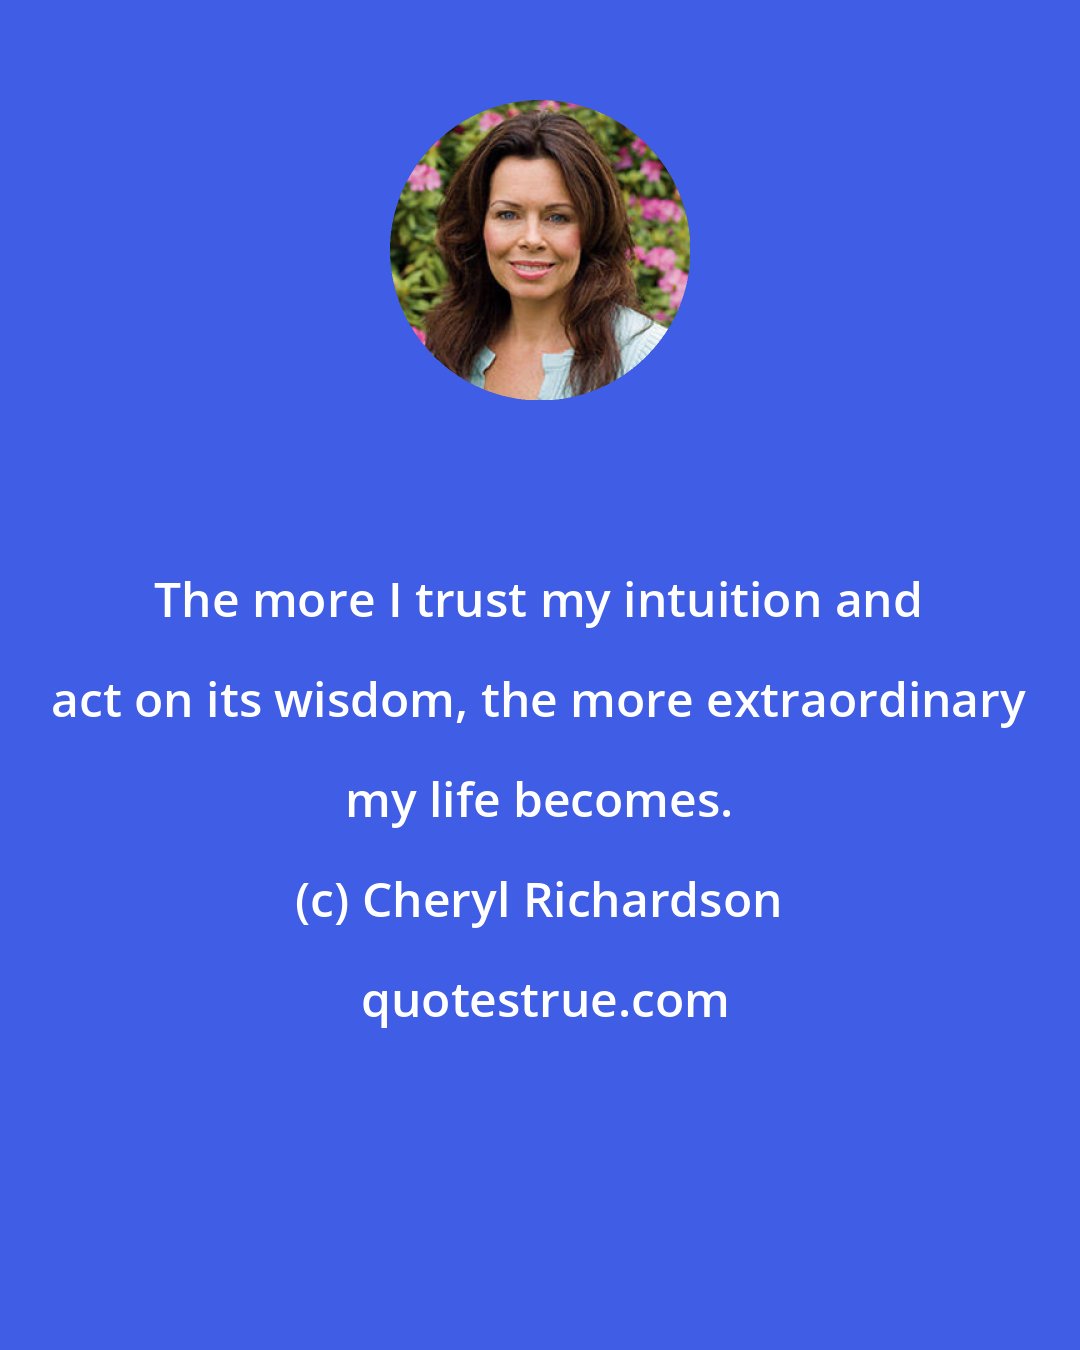 Cheryl Richardson: The more I trust my intuition and act on its wisdom, the more extraordinary my life becomes.